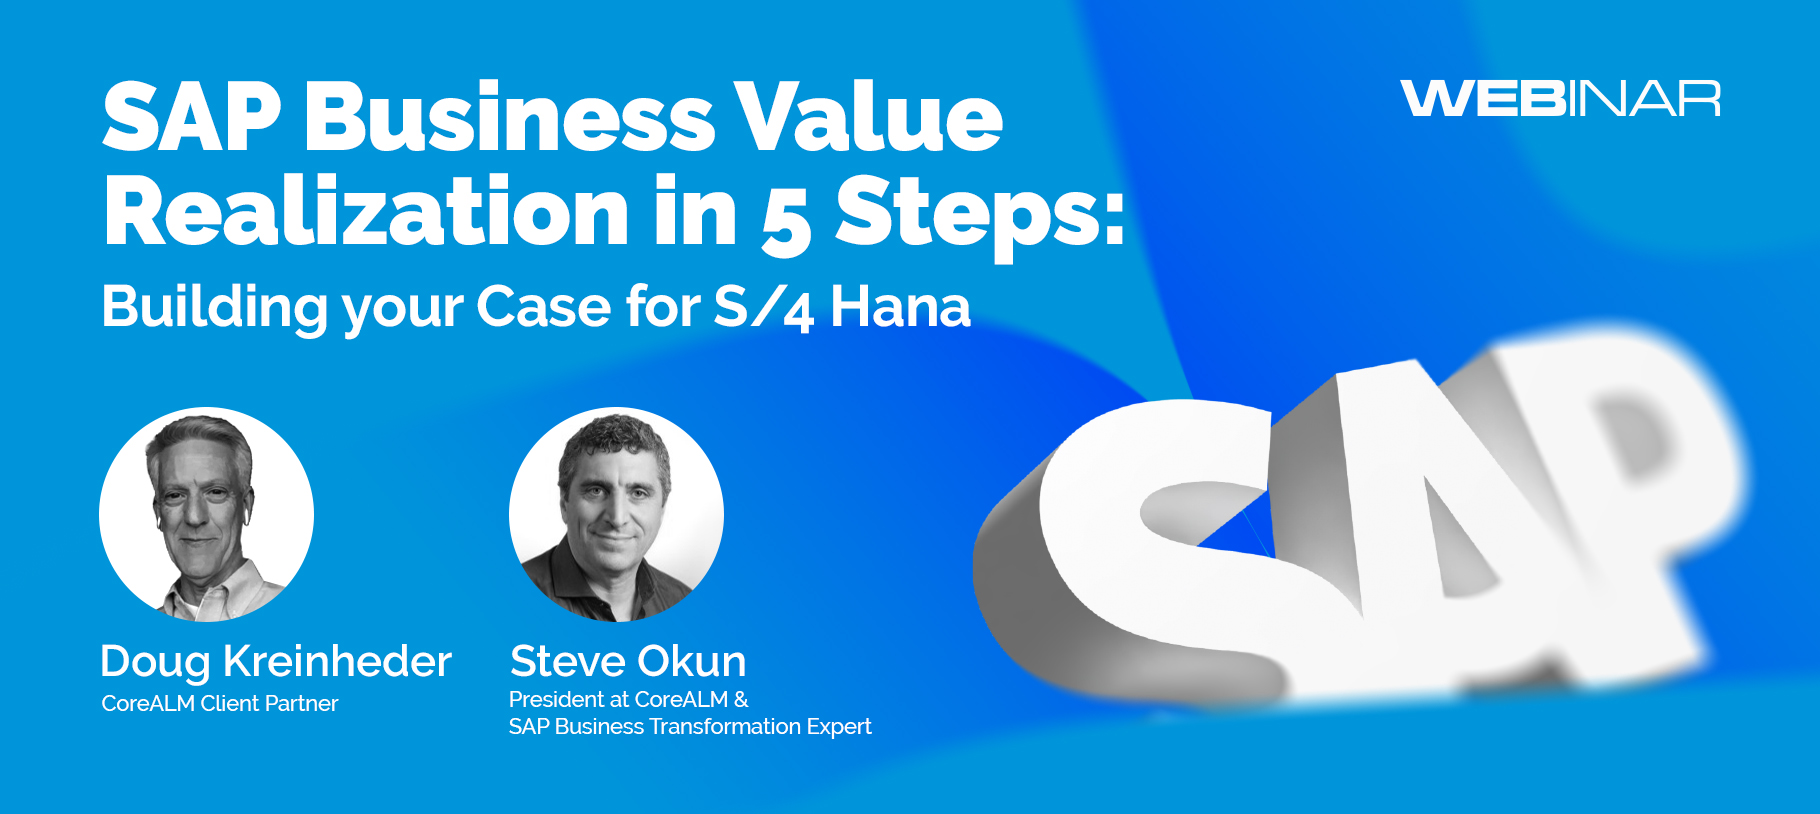 SAP Business Value Realization In 5 Steps: Building Your Case For S/4 Hana